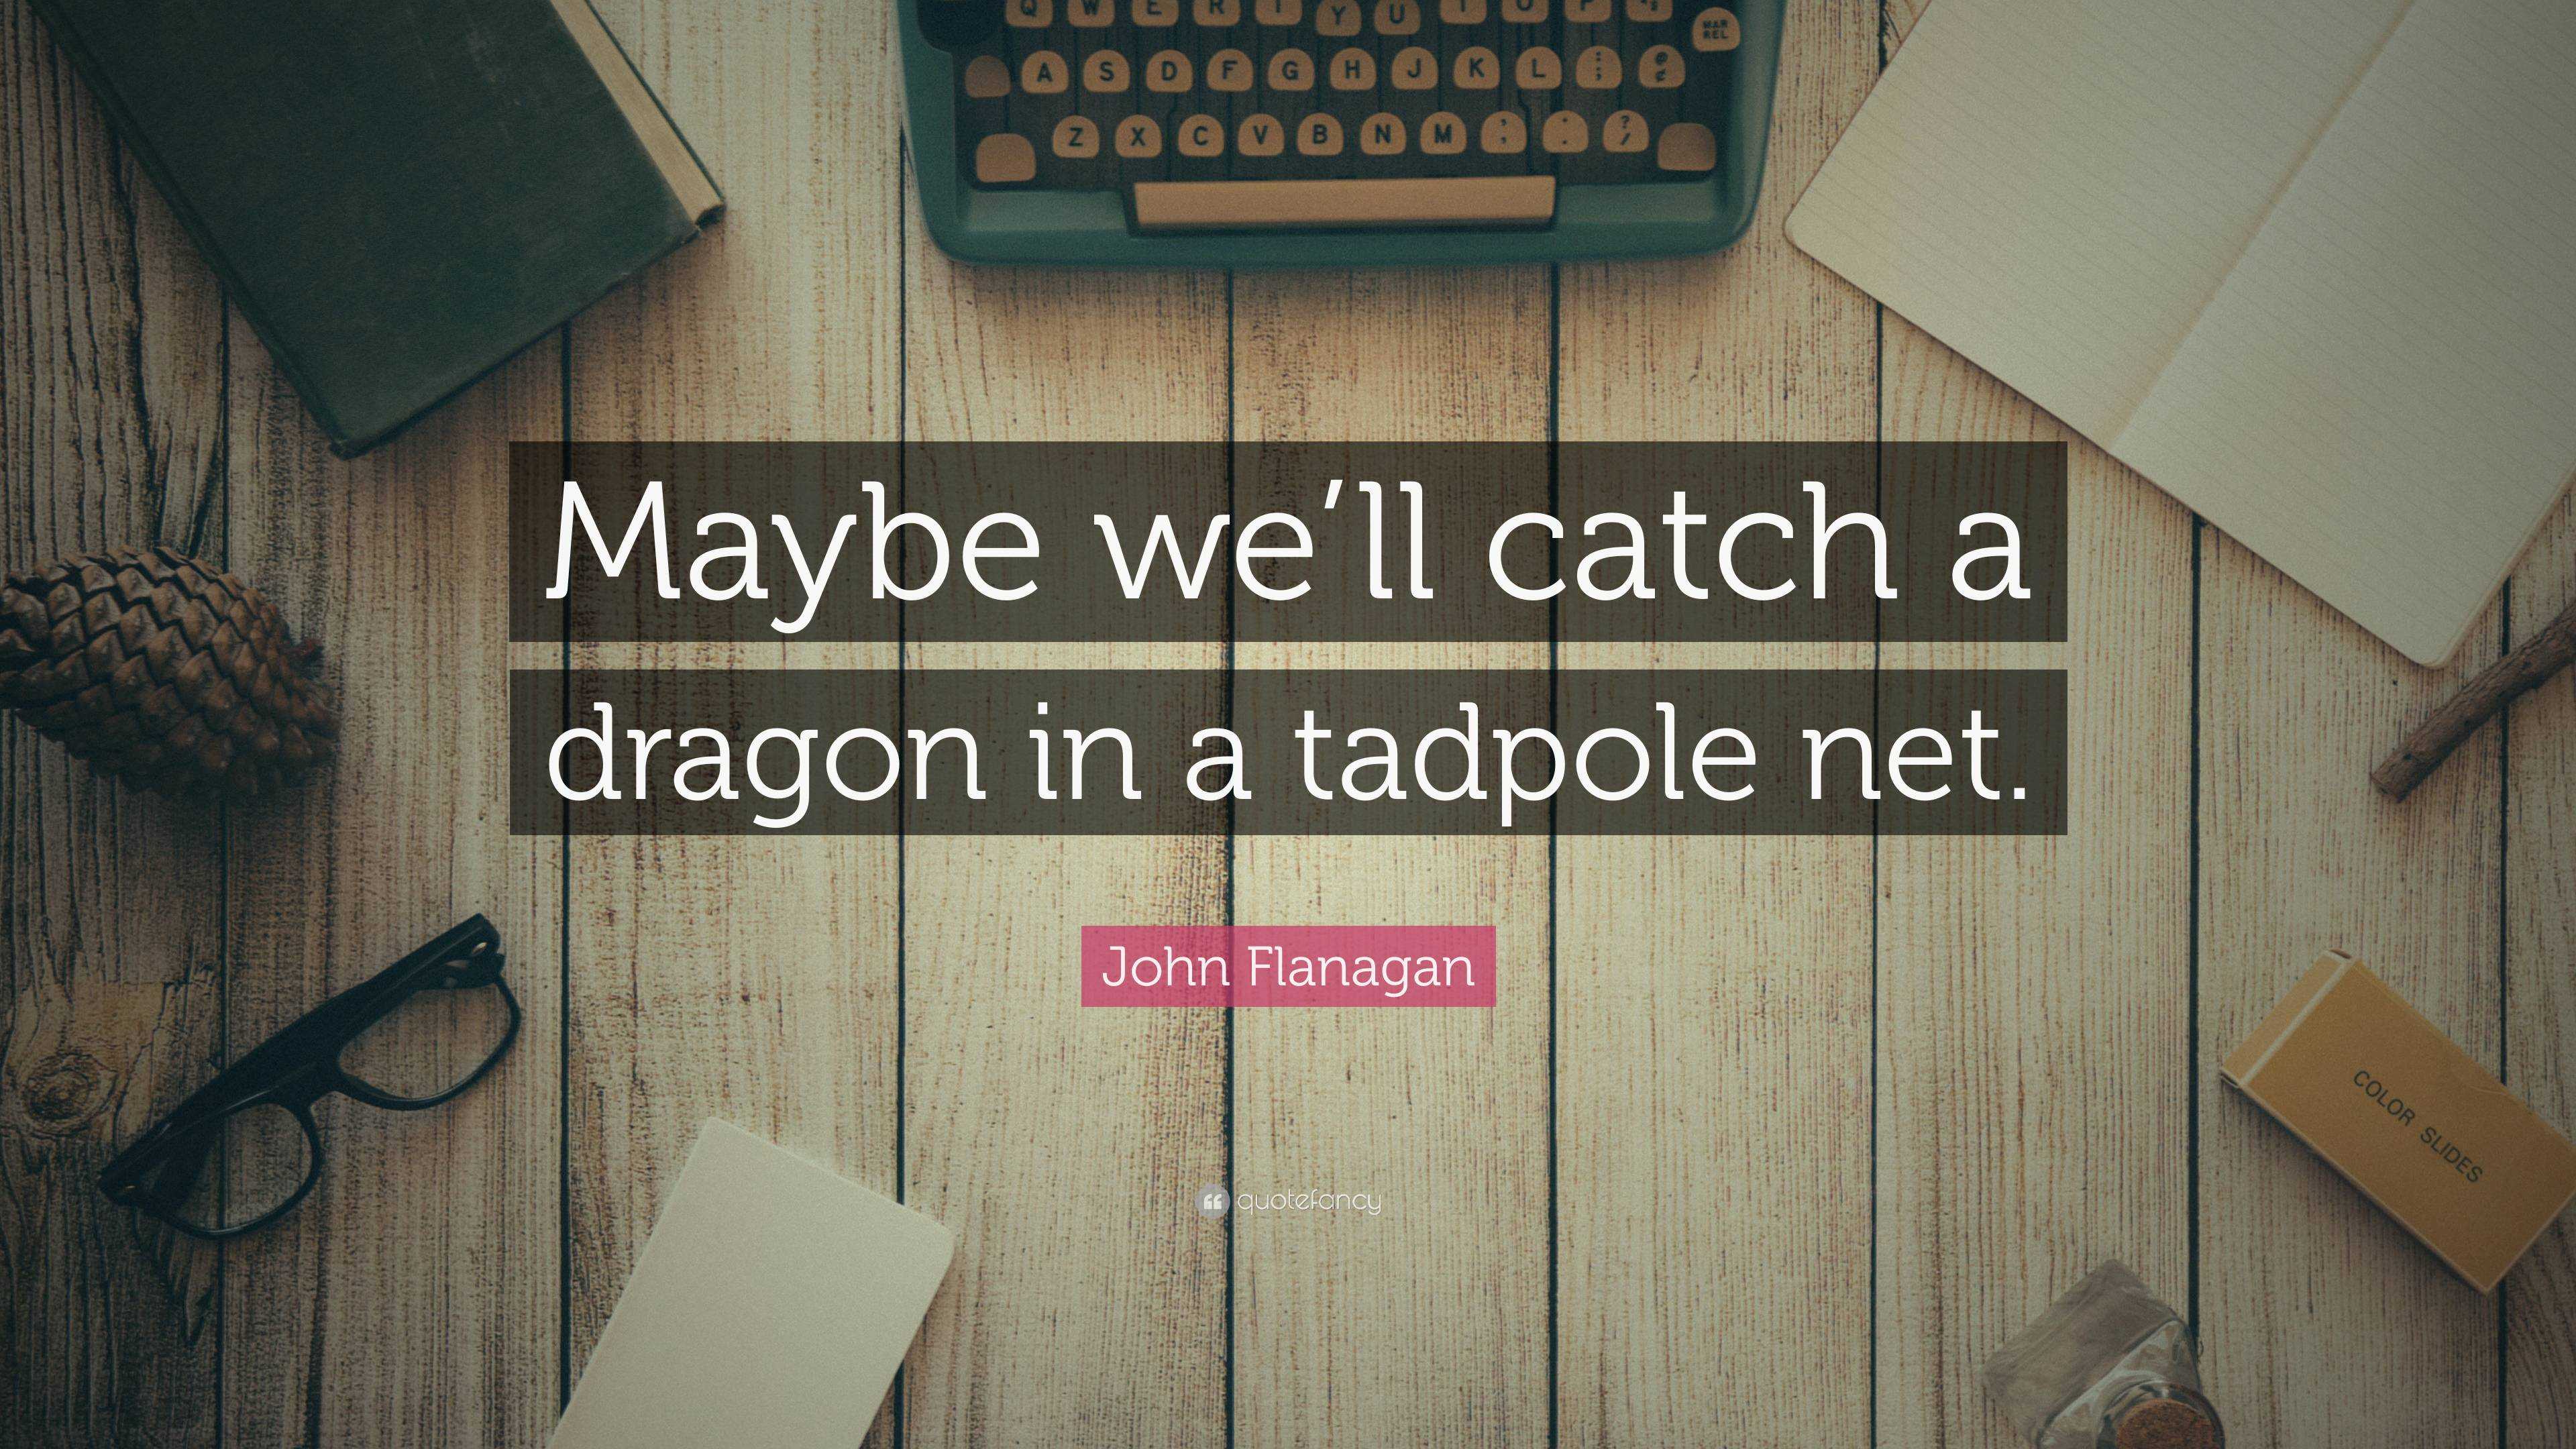 John Flanagan Quote: “Maybe we'll catch a dragon in a tadpole net.”